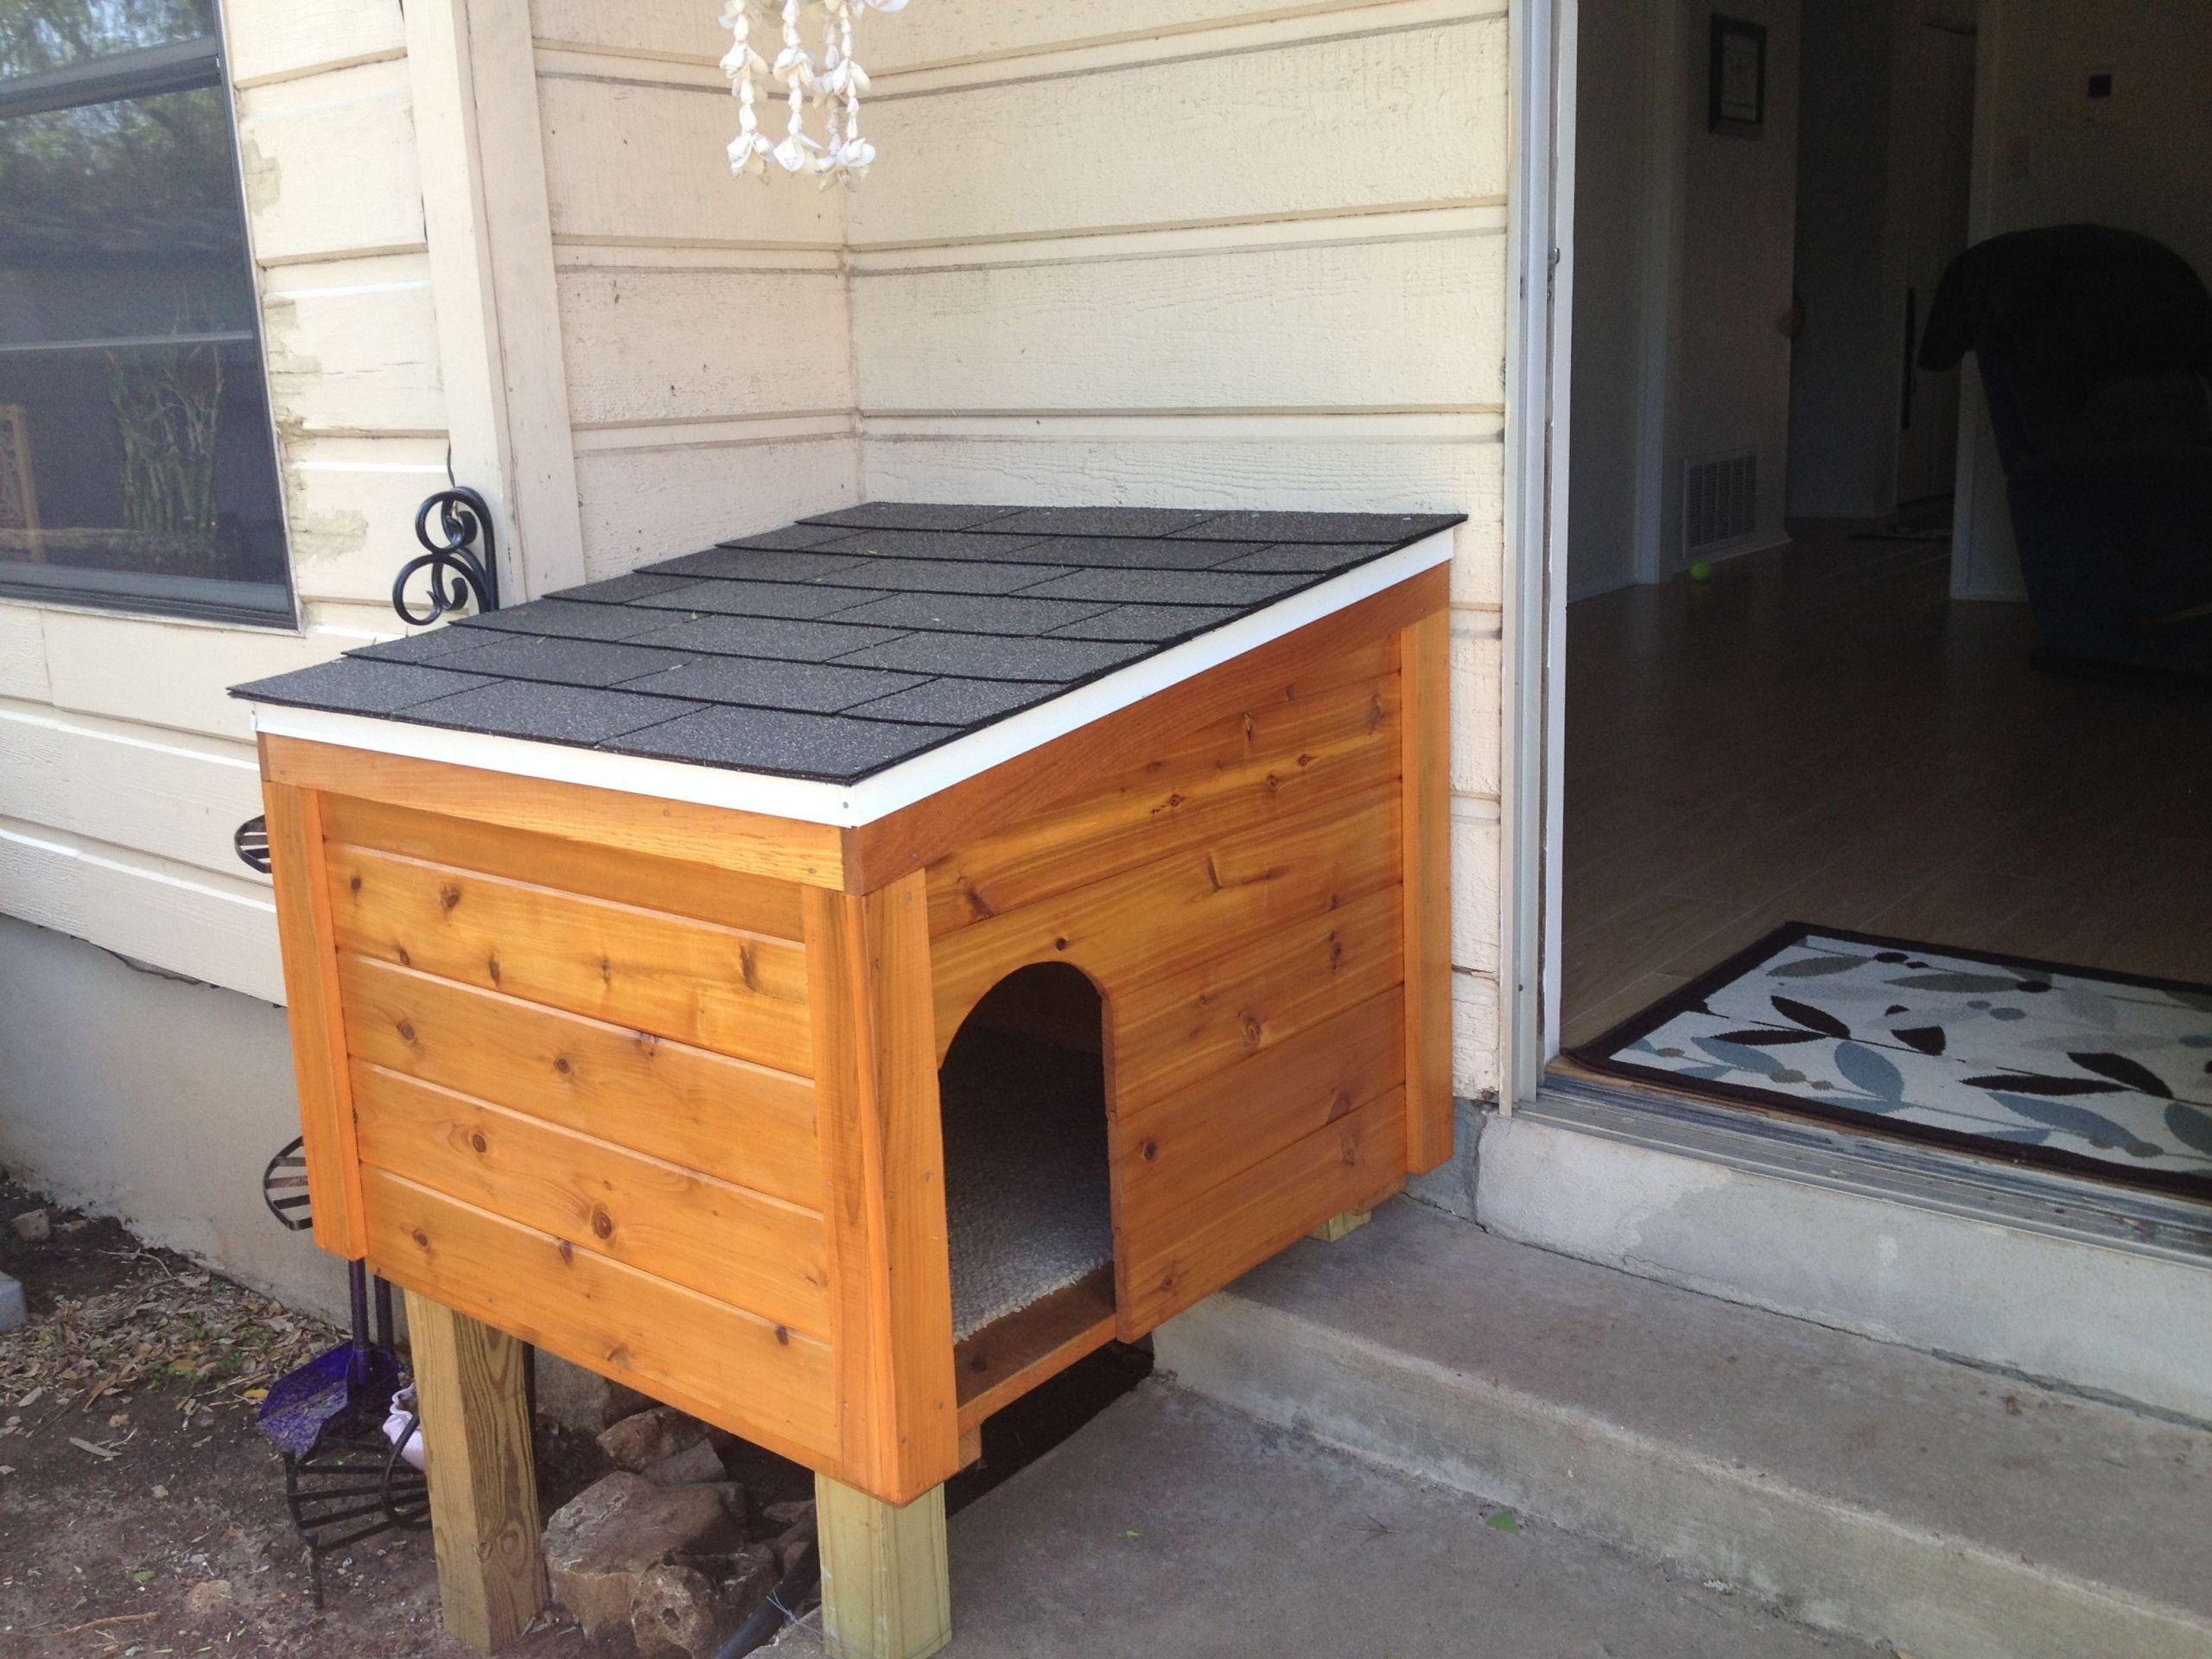 DIY Dog House Door
 Build a dog house in front of the doggy door to hide it